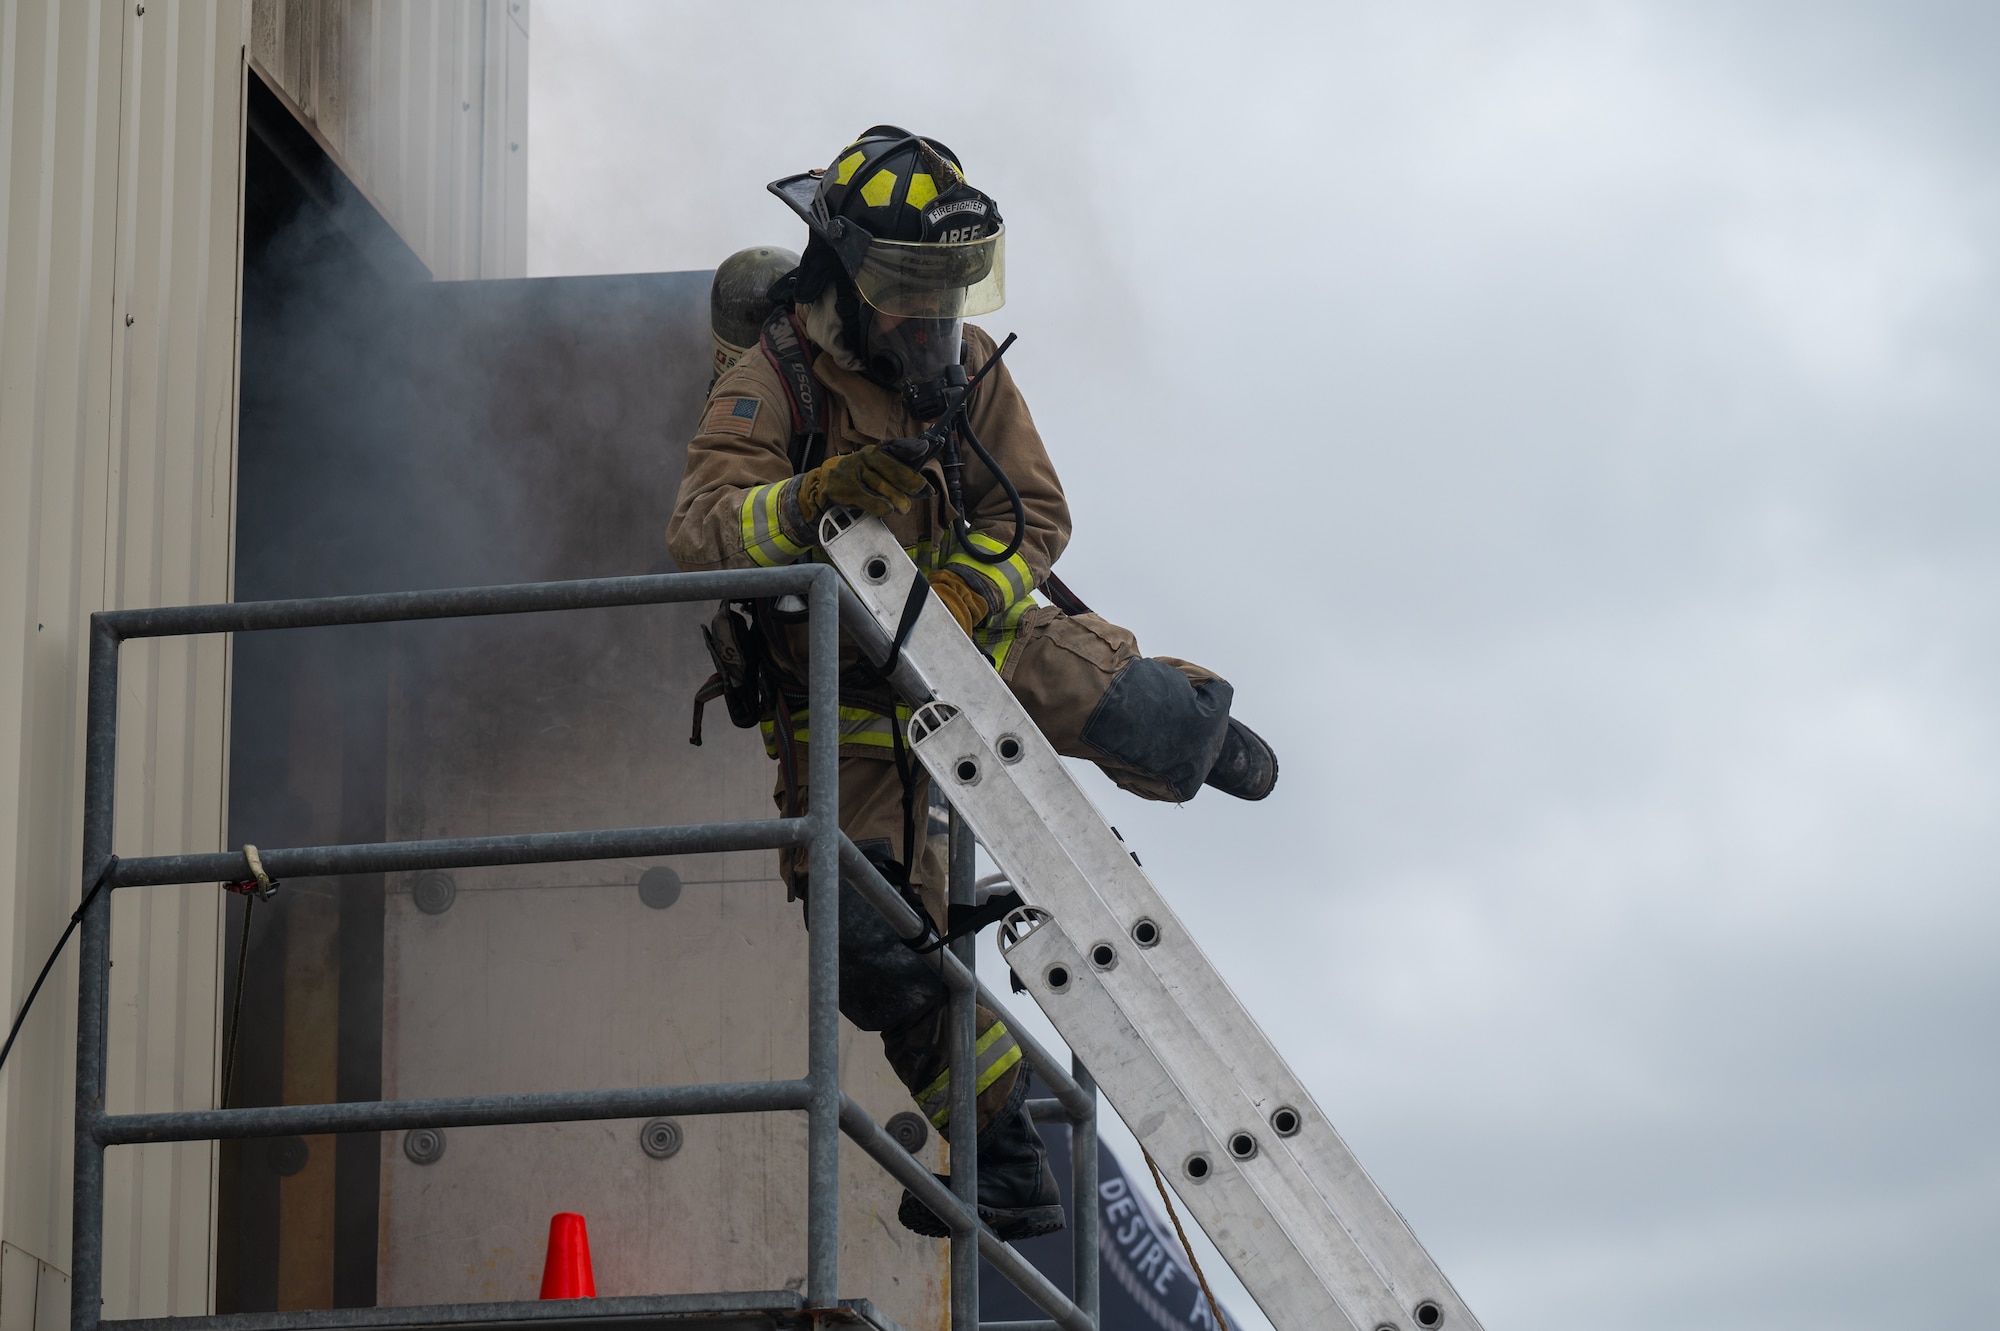 A firefighter in full protective gear swings his leg over a bar. On the other side of the bar, leaned against the platform he was once standing on, a ladder.